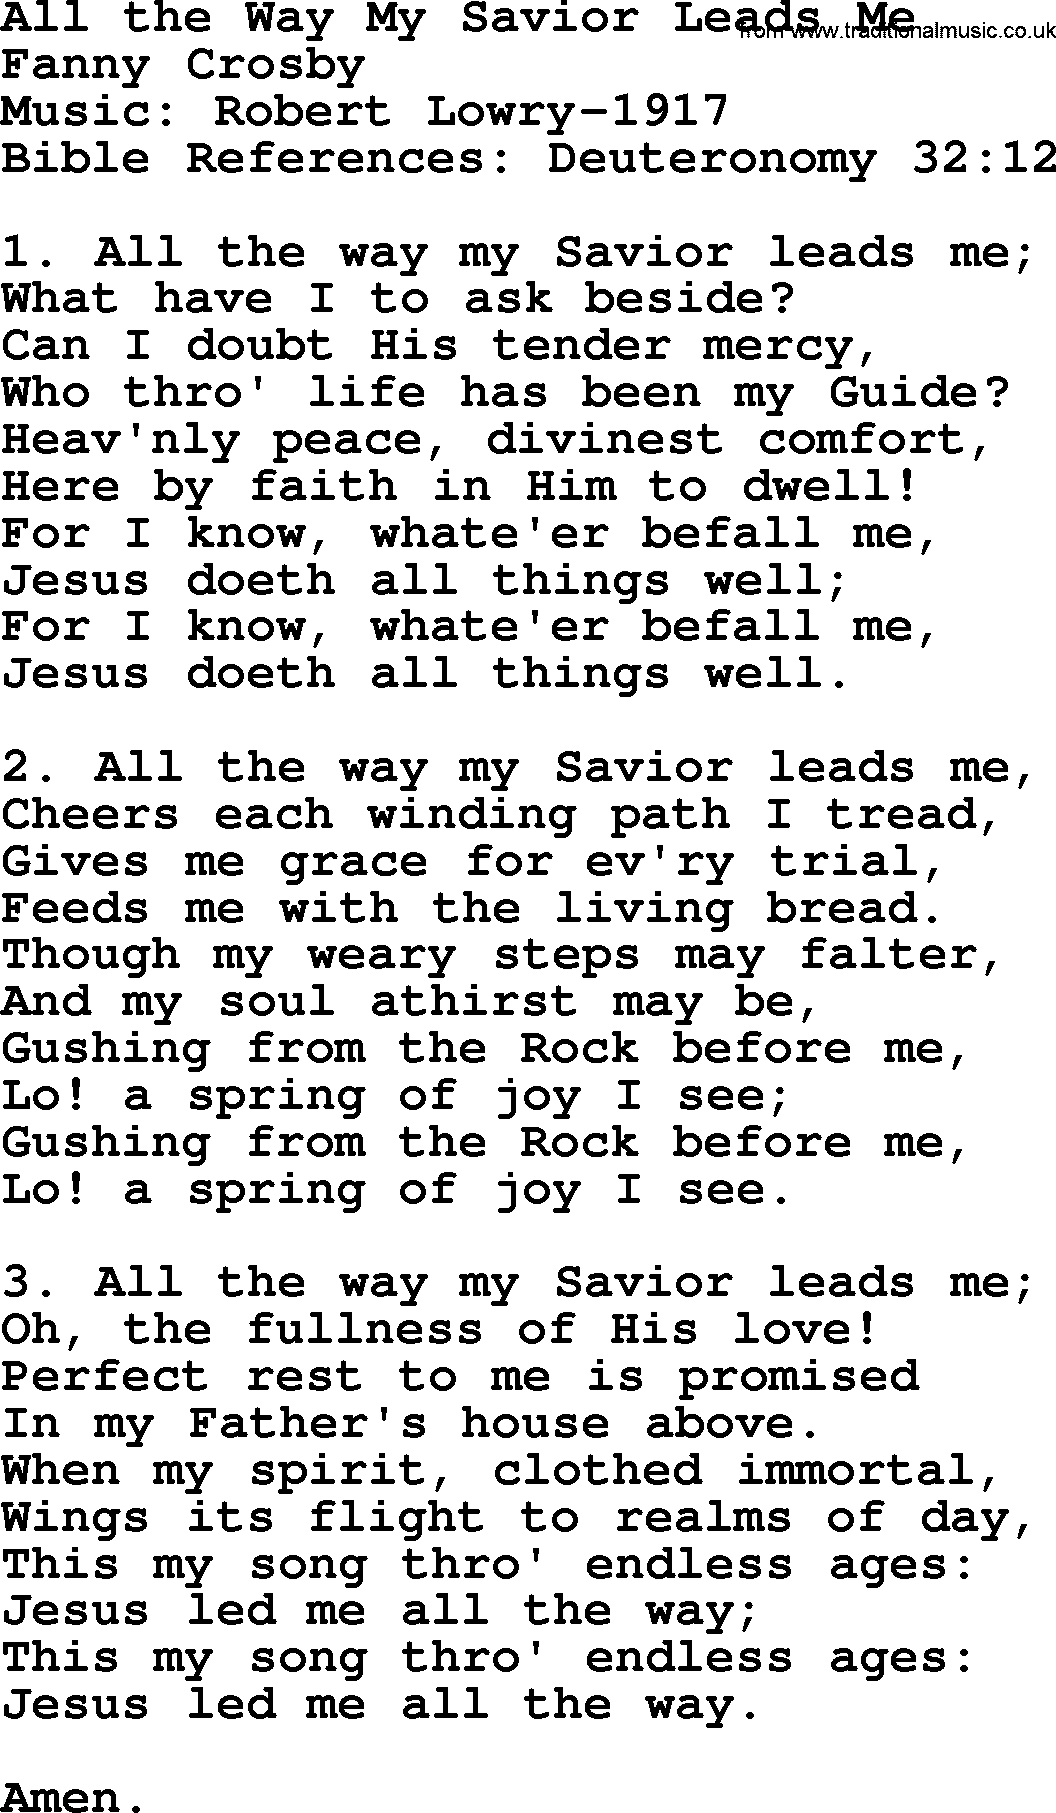 A collection of 500+ most sung Christian church hymns and songs, title: All The Way My Savior Leads Me, lyrics, PPTX and PDF